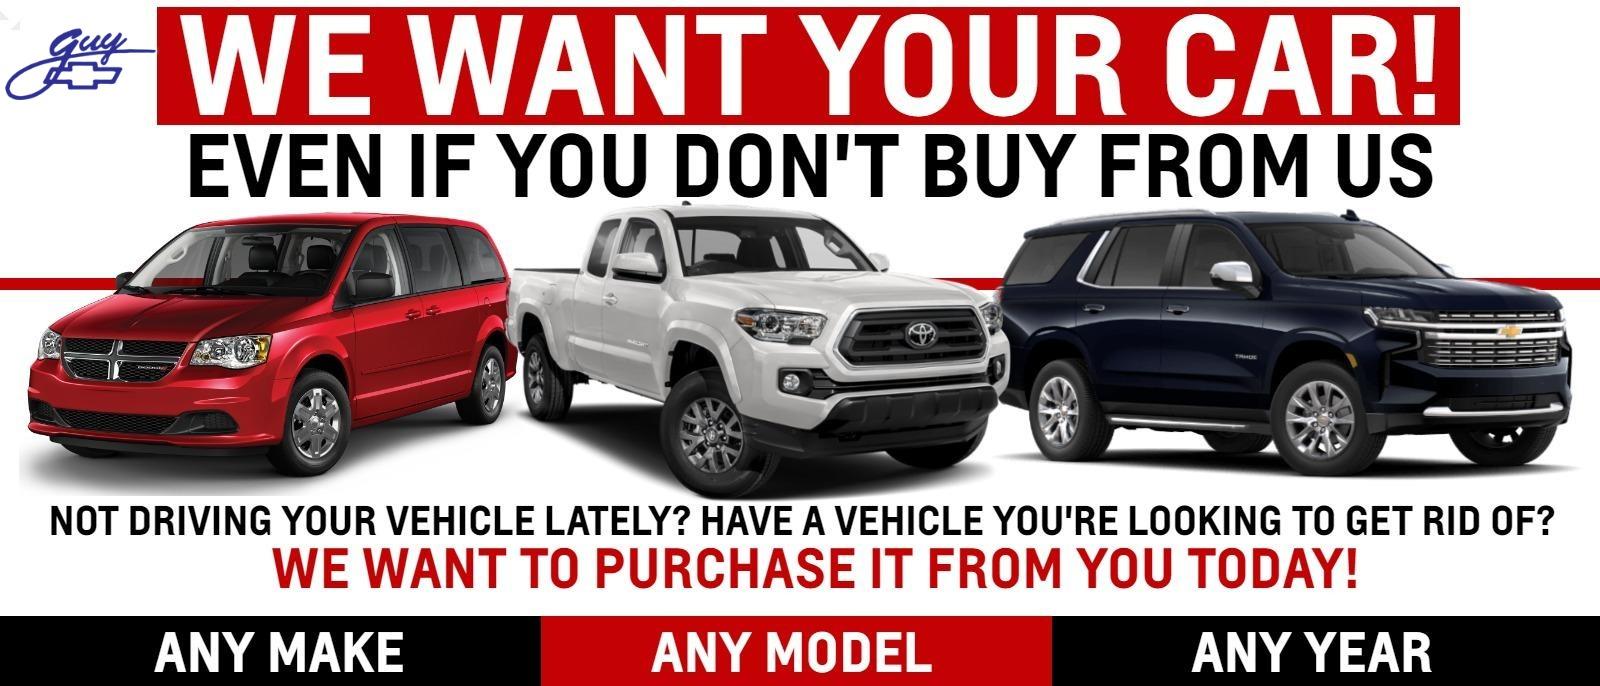 GUY CHEVROLET WILL BUY YOUR CAR EVEN IF YOU DON'T BUY OURS!